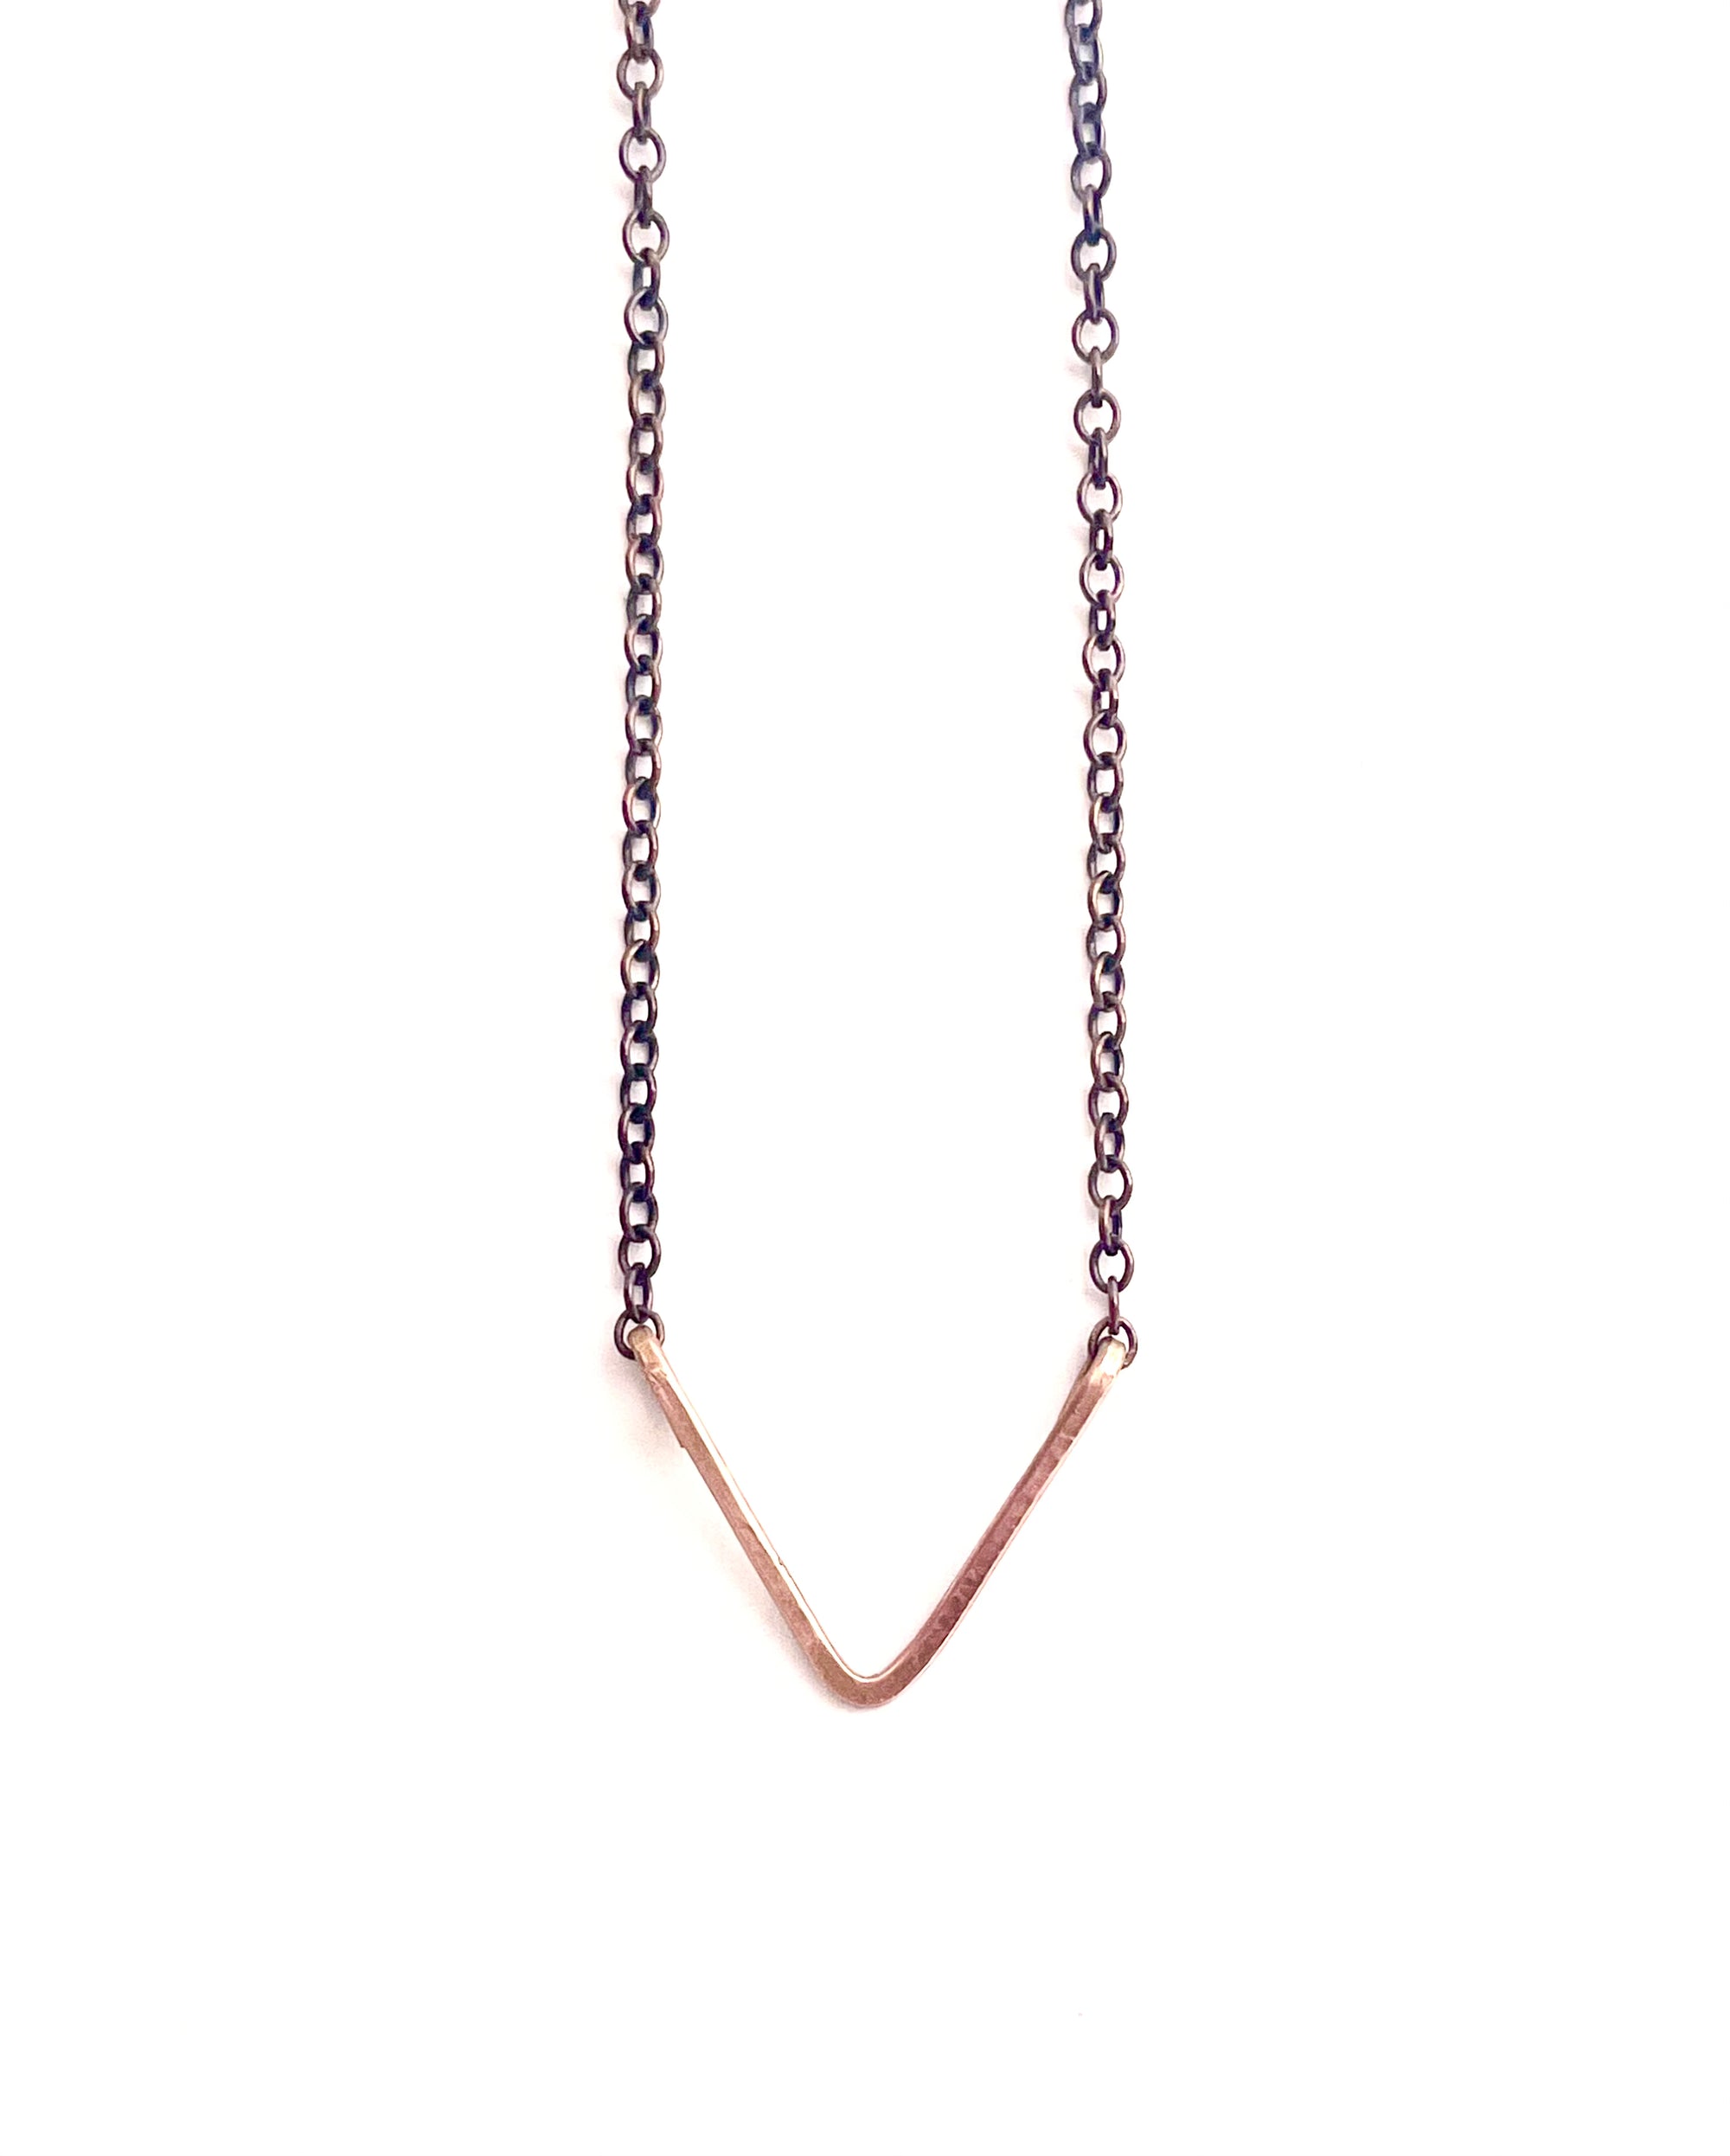 Vee on Chain Necklace, Small